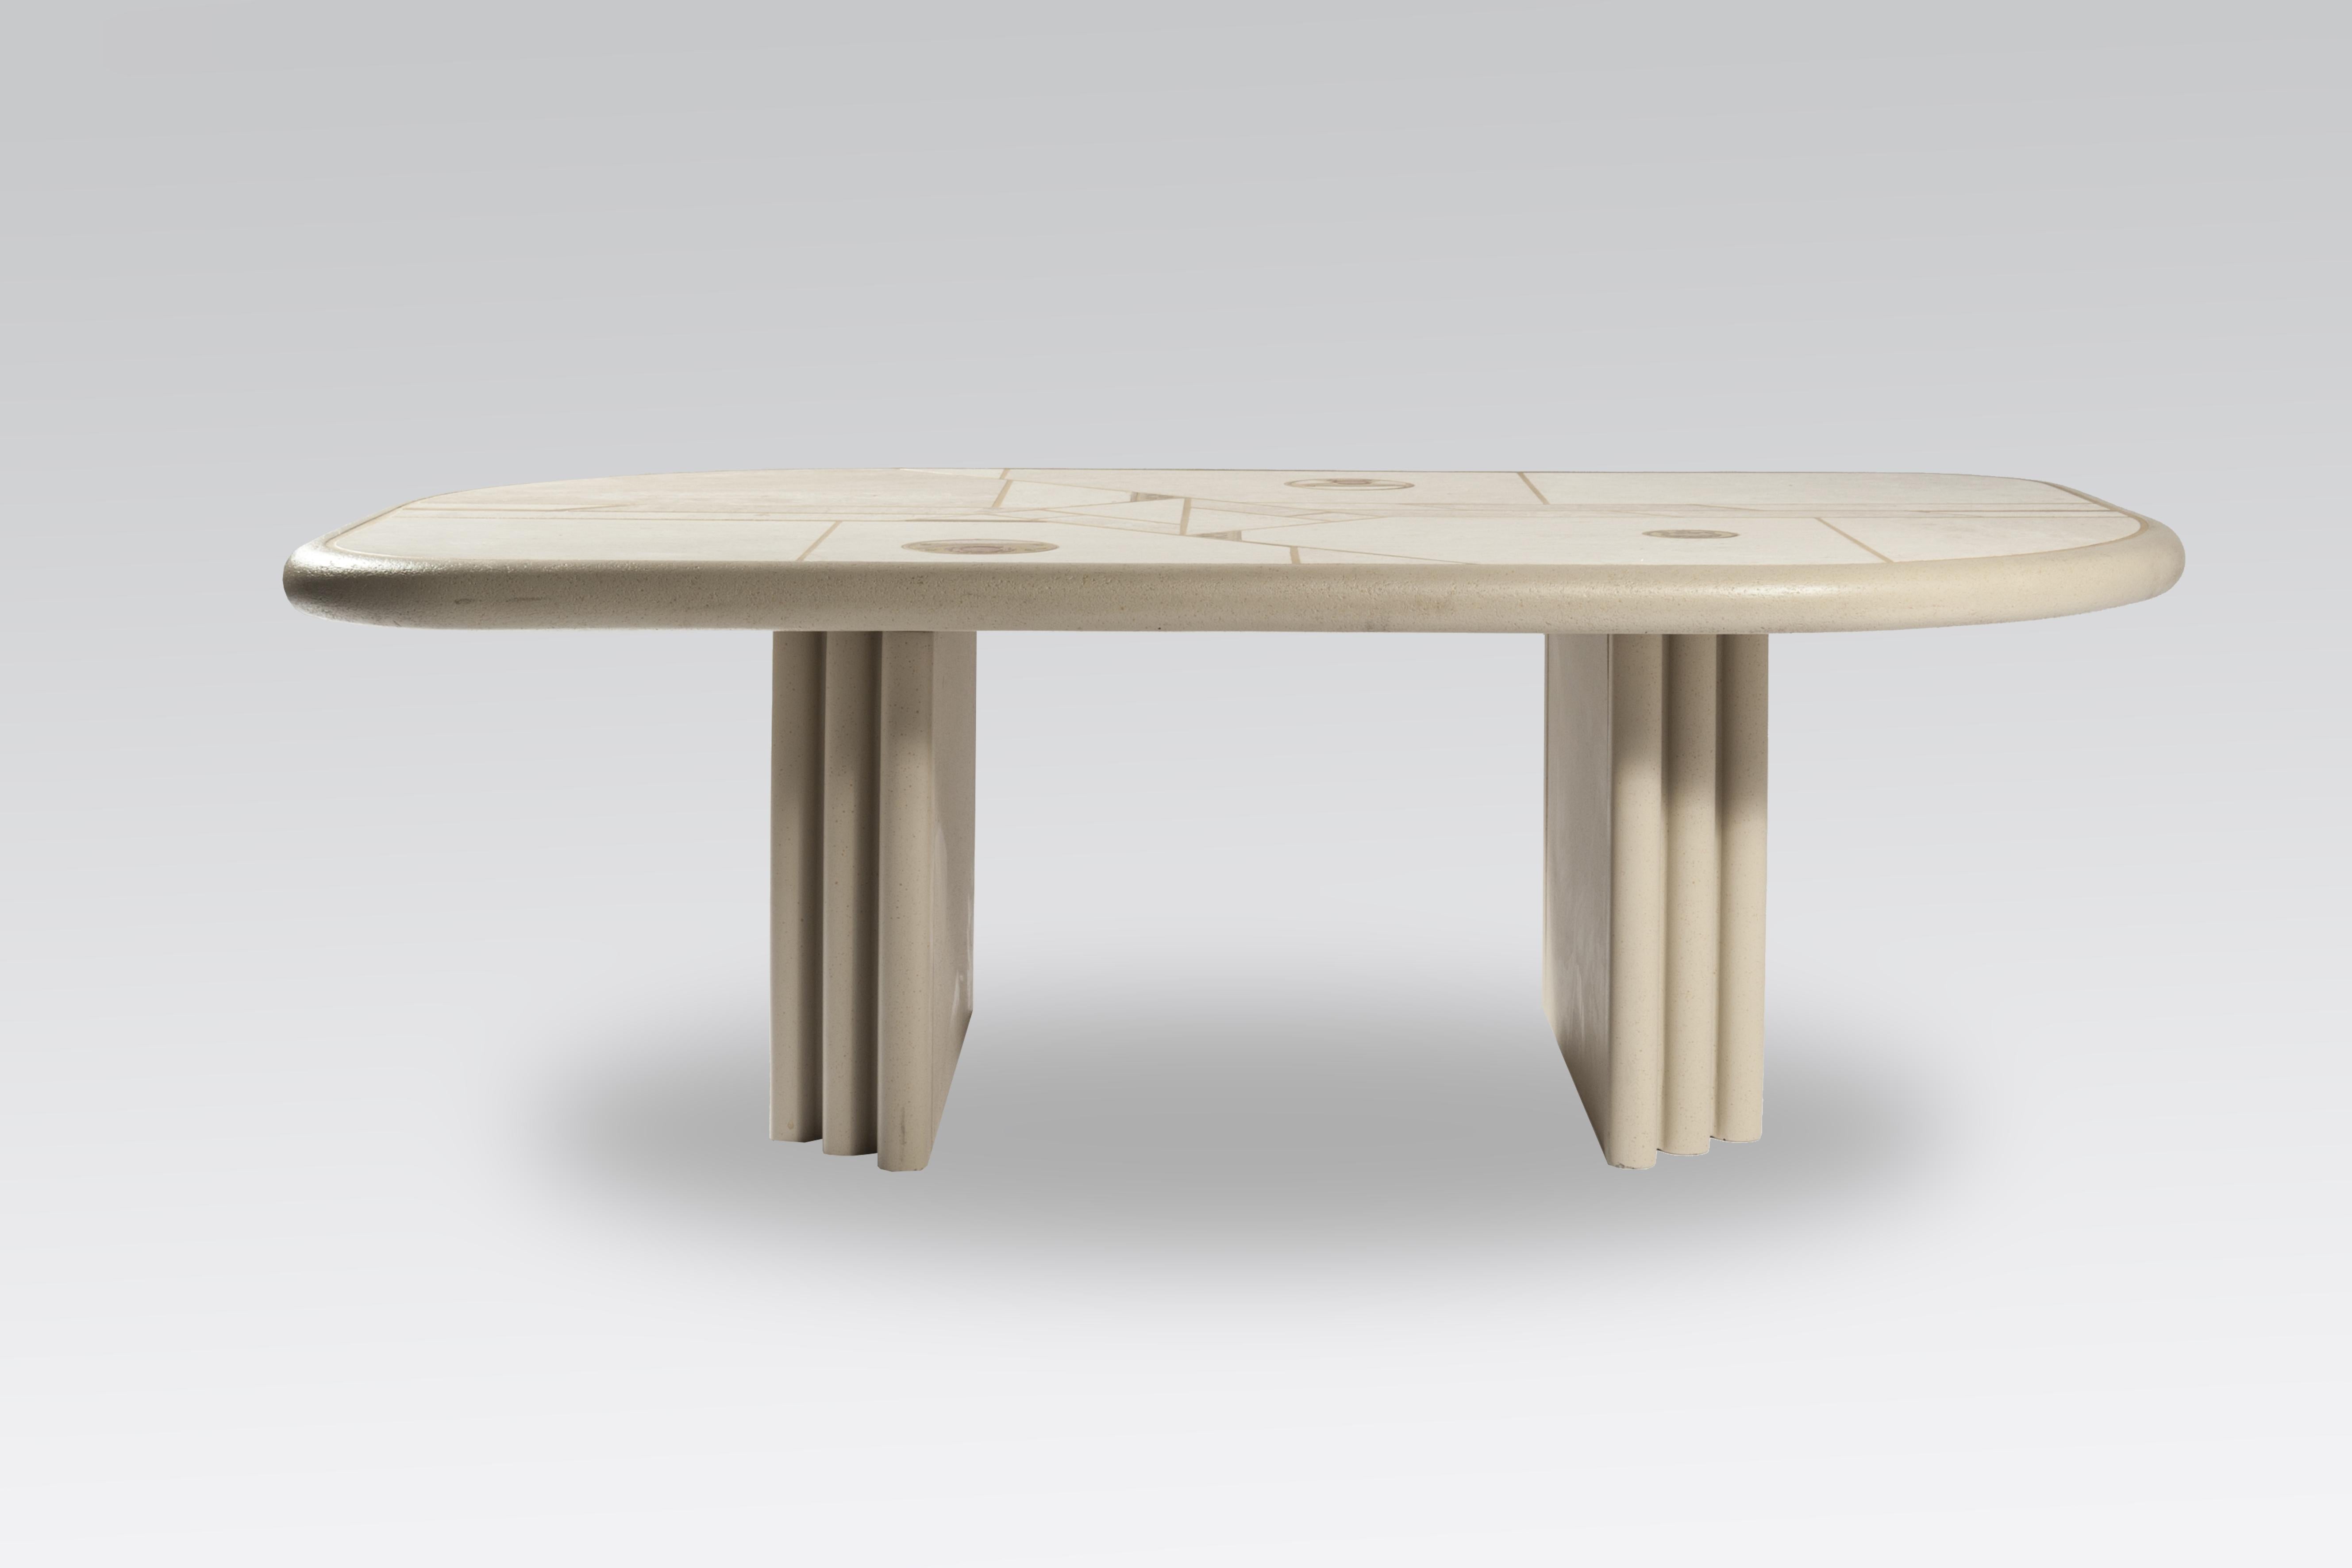 White rectangular coffee table designed and made by Design Kingma. The table has a wood base, white lacquered and is marked Design Kingma.